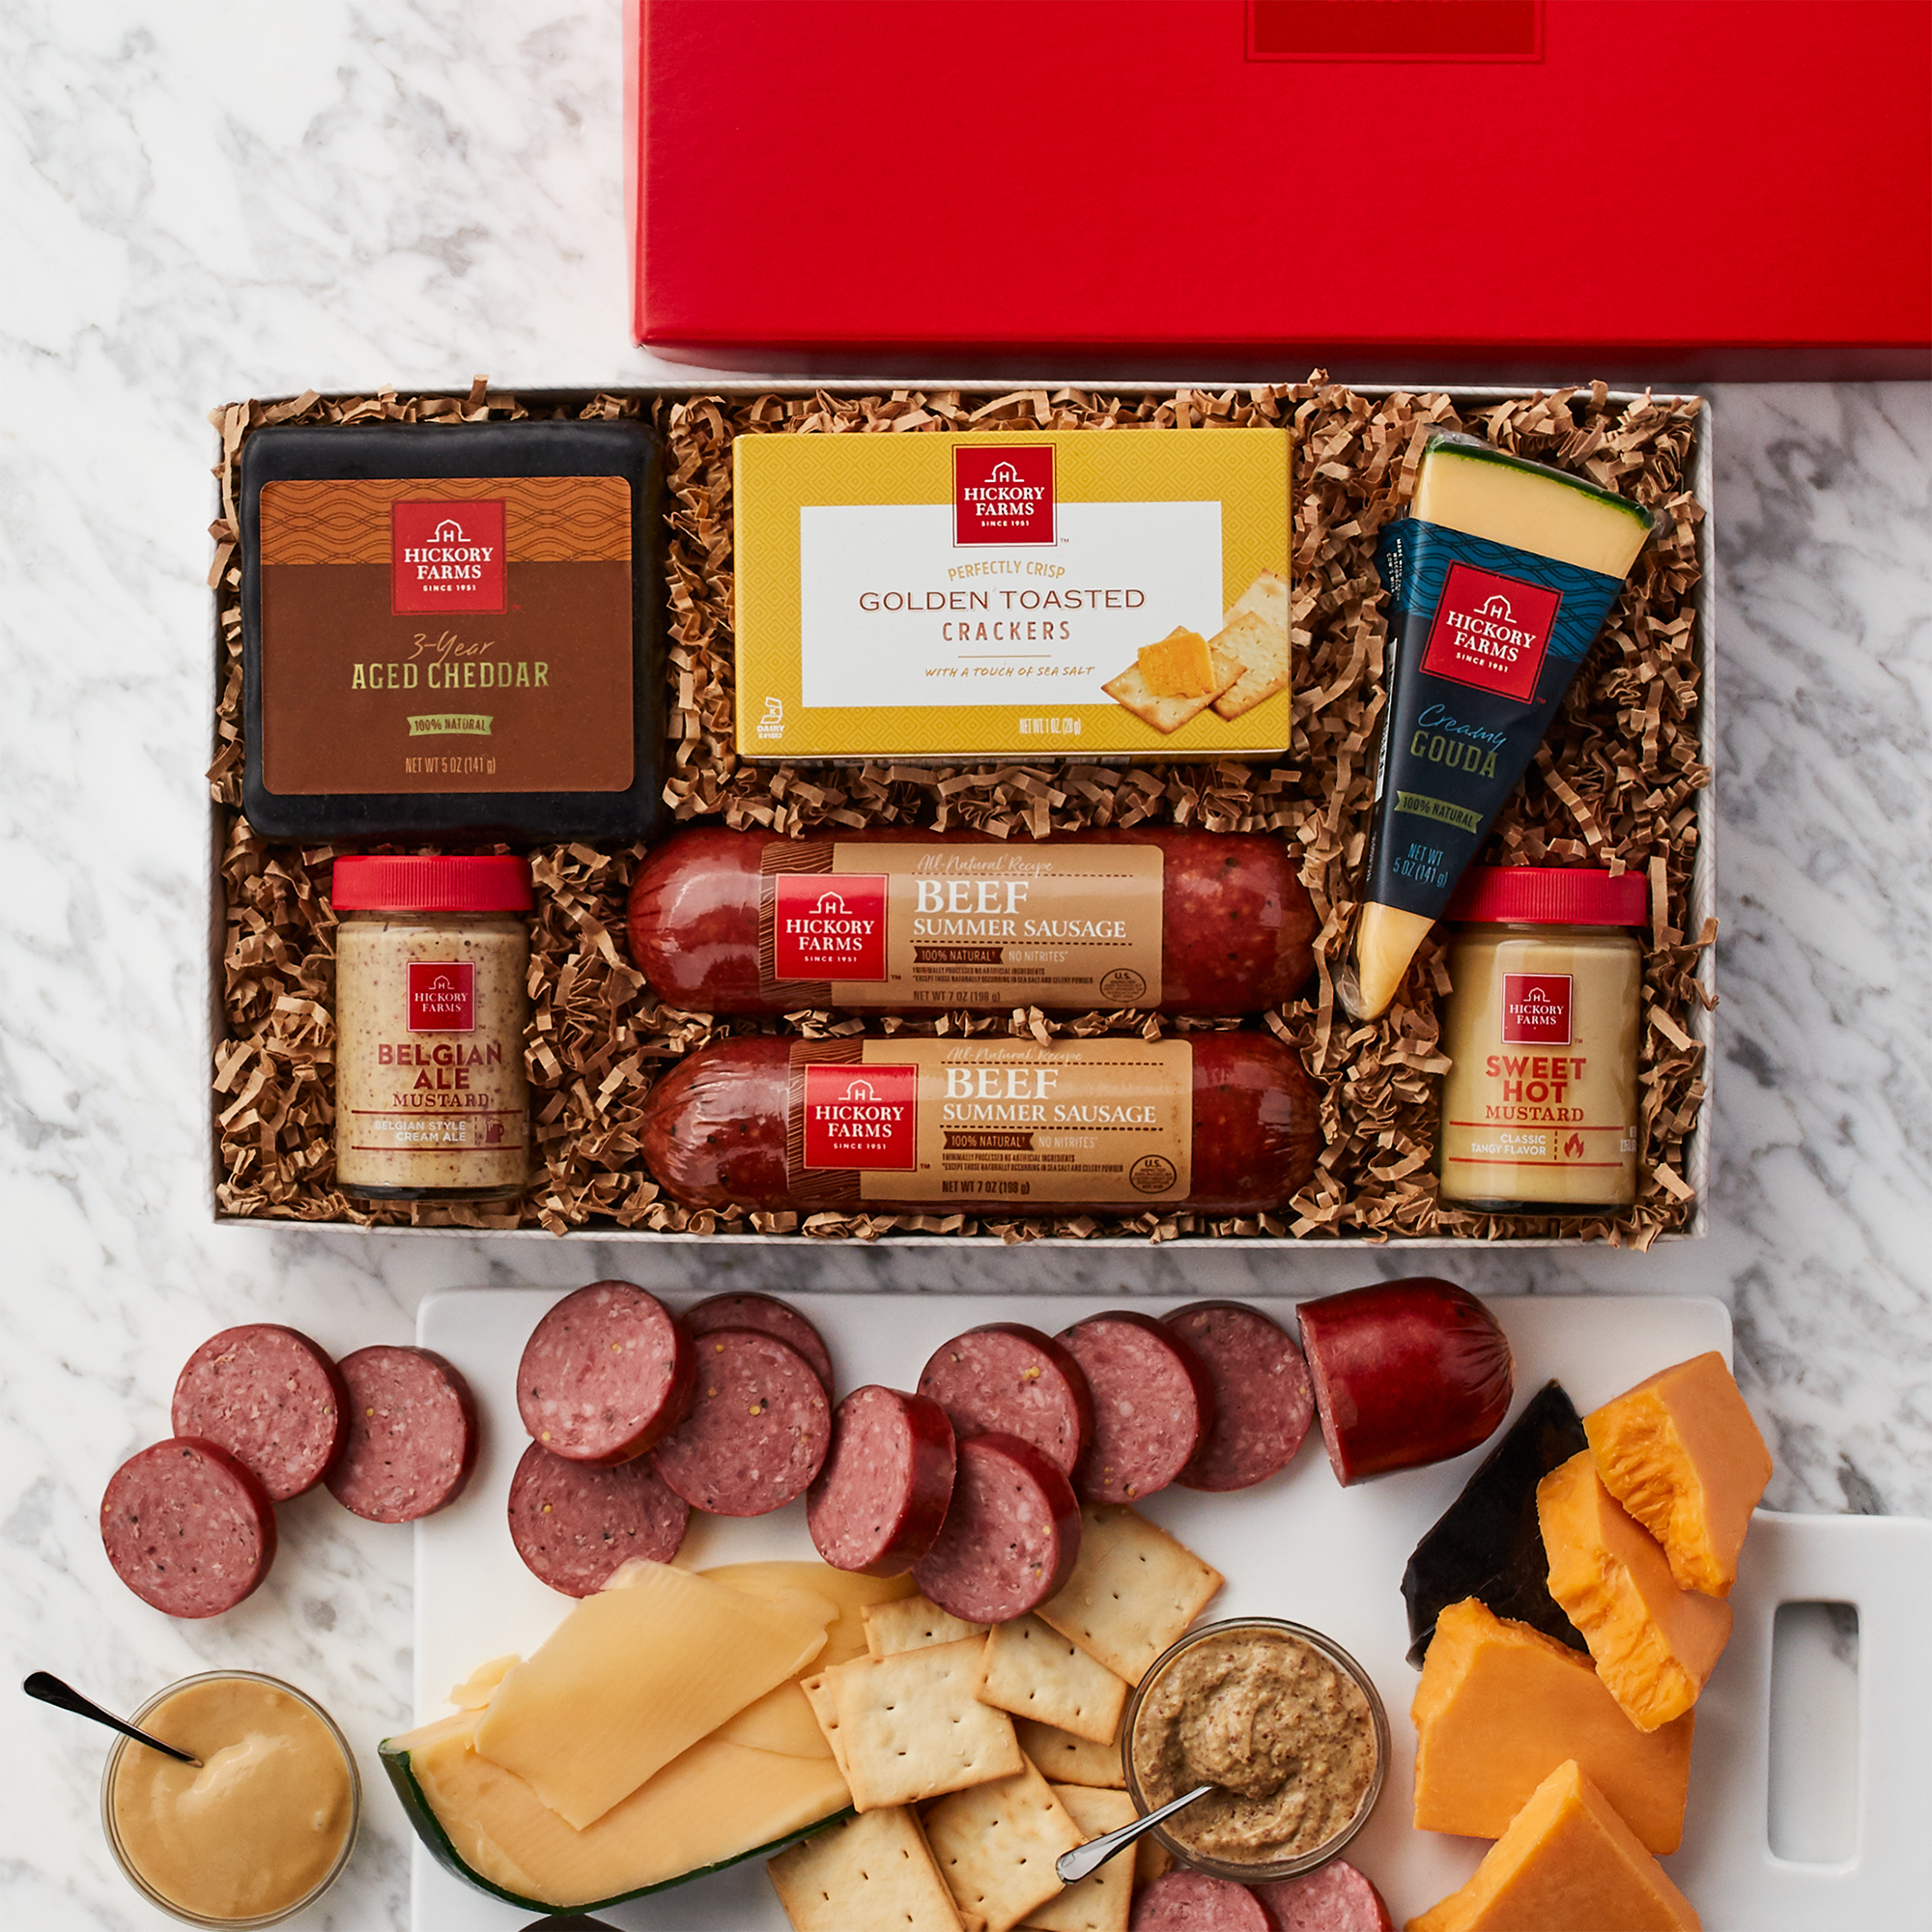 https://www.hickoryfarms.com/on/demandware.static/-/Sites-Web-Master-Catalog/default/dwa68e538f/images/products/all-natural-sausage-and-cheese-gift-box-008310-1.jpg